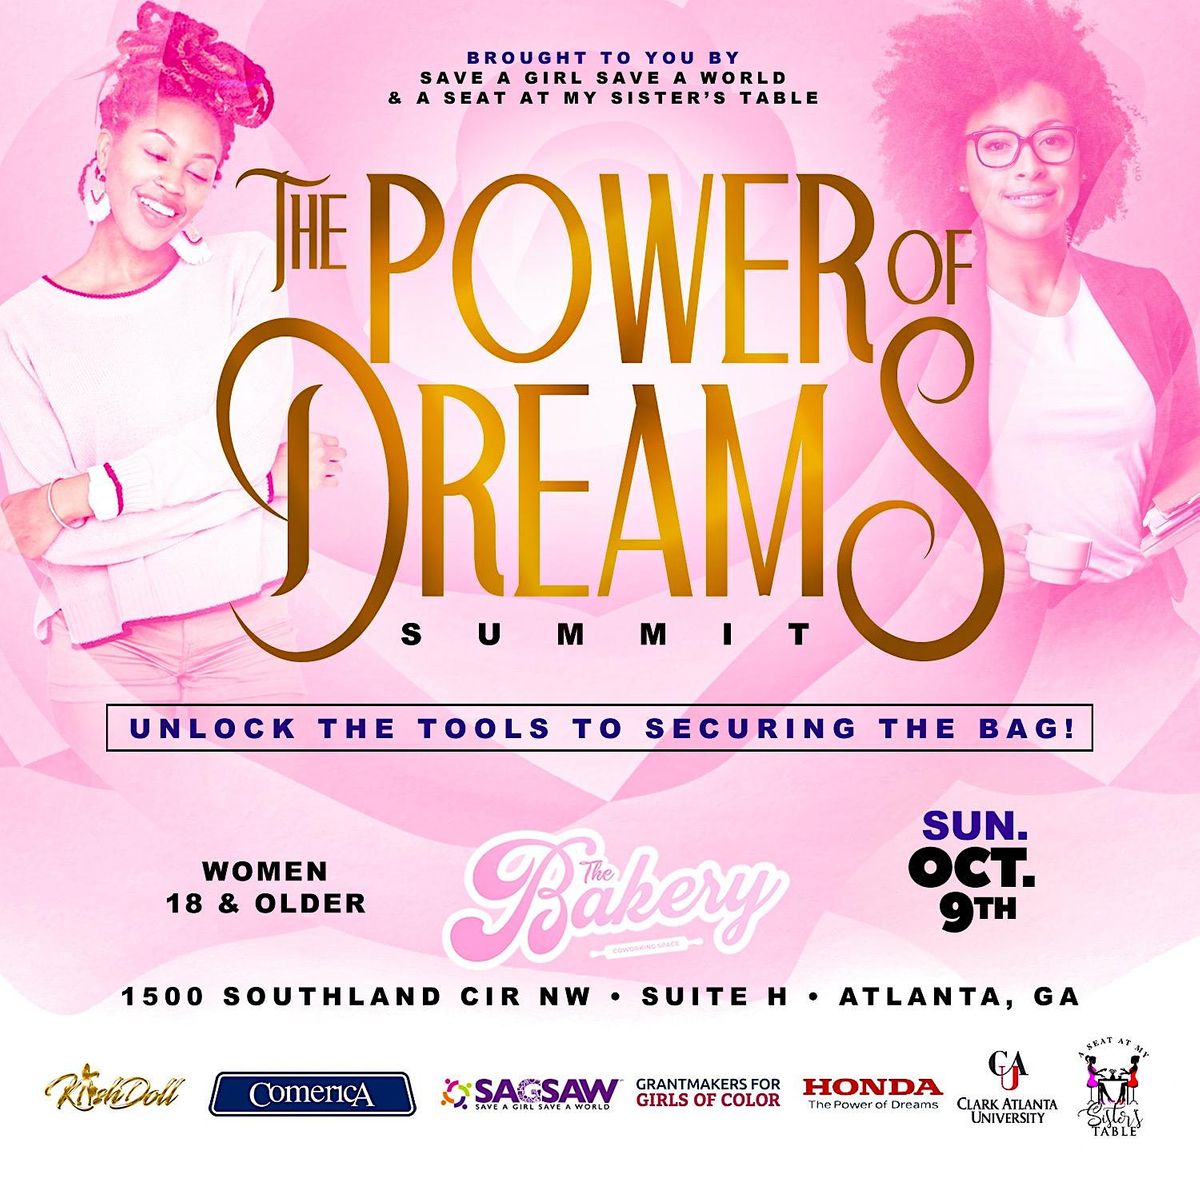 The Power of Dreams Summit